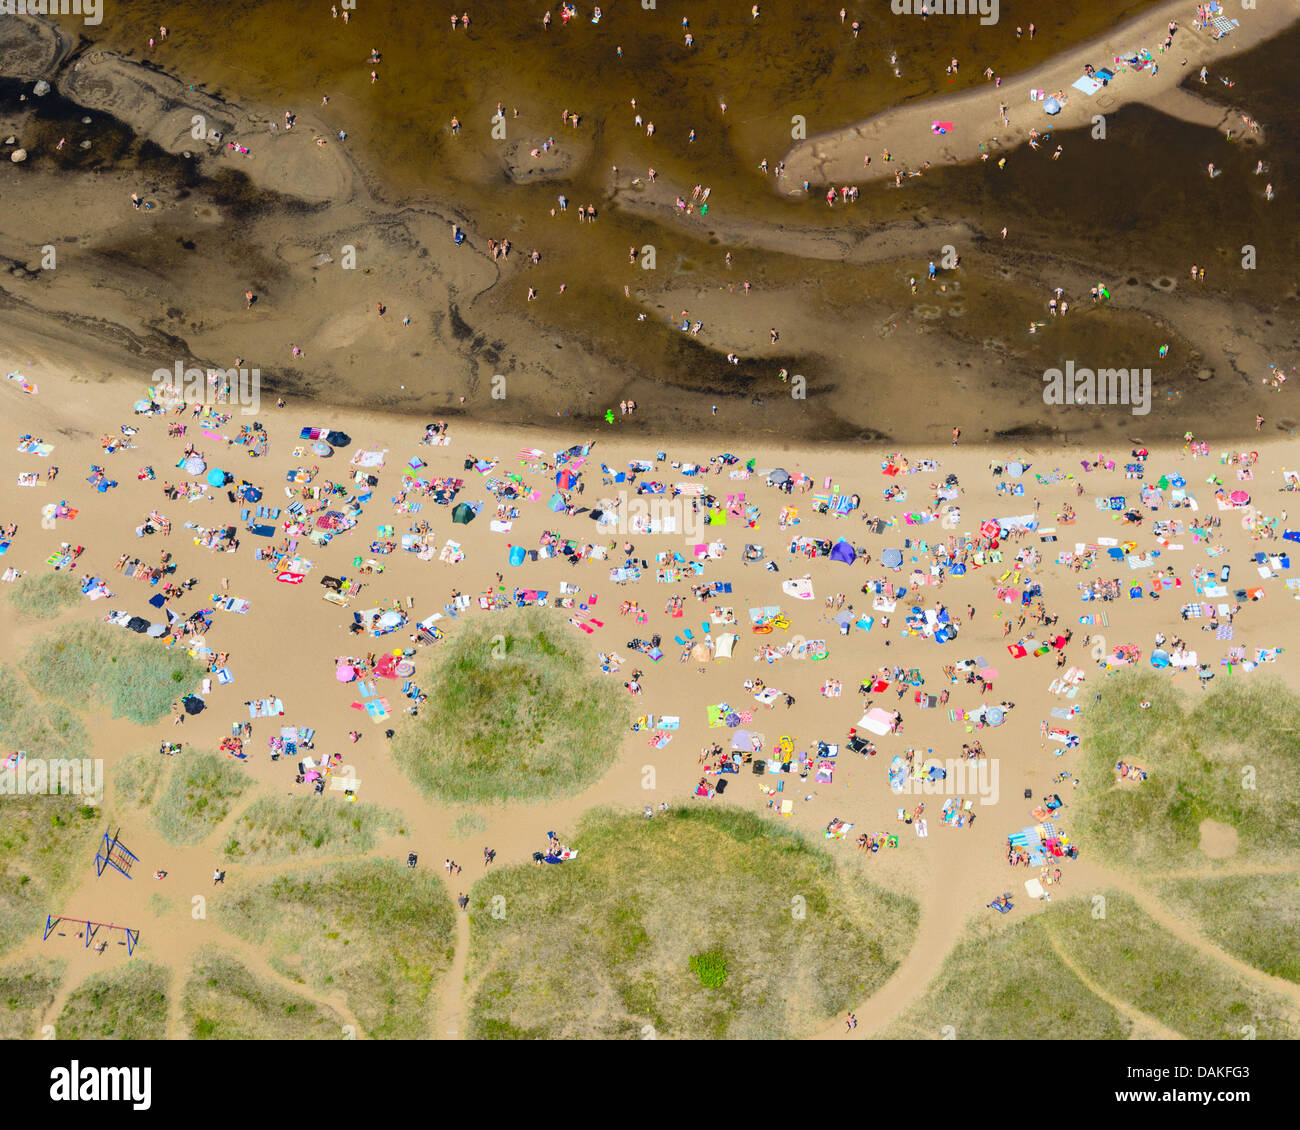 Aerial view of people on beach, Rullsand, Uppland, Sweden Stock Photo